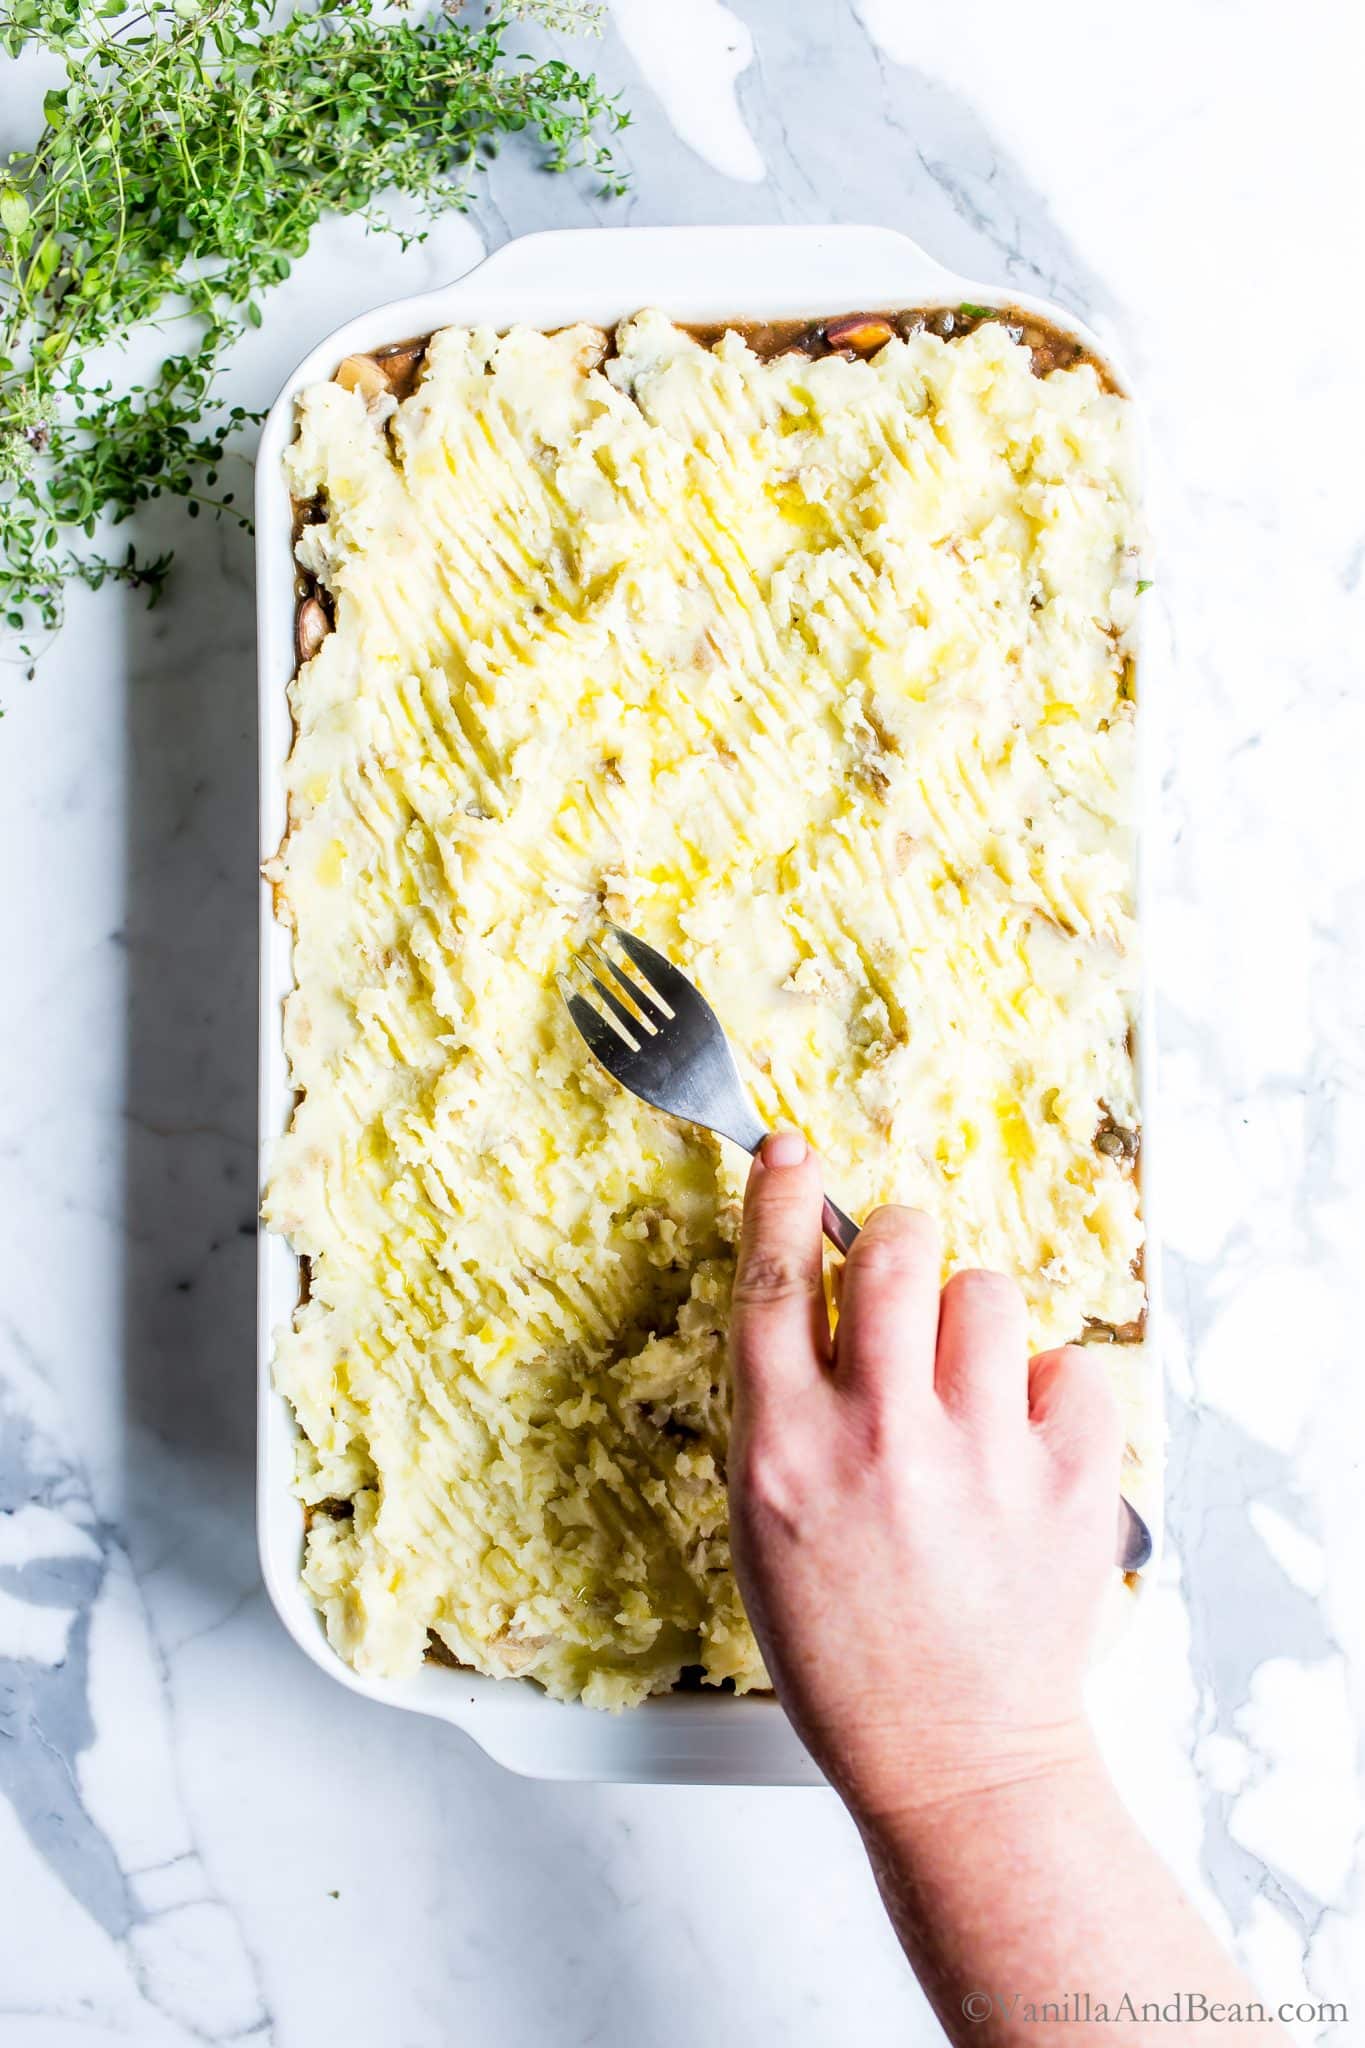 Top the casserole with the mashed potatoes and run a fork over the top for decoration. 